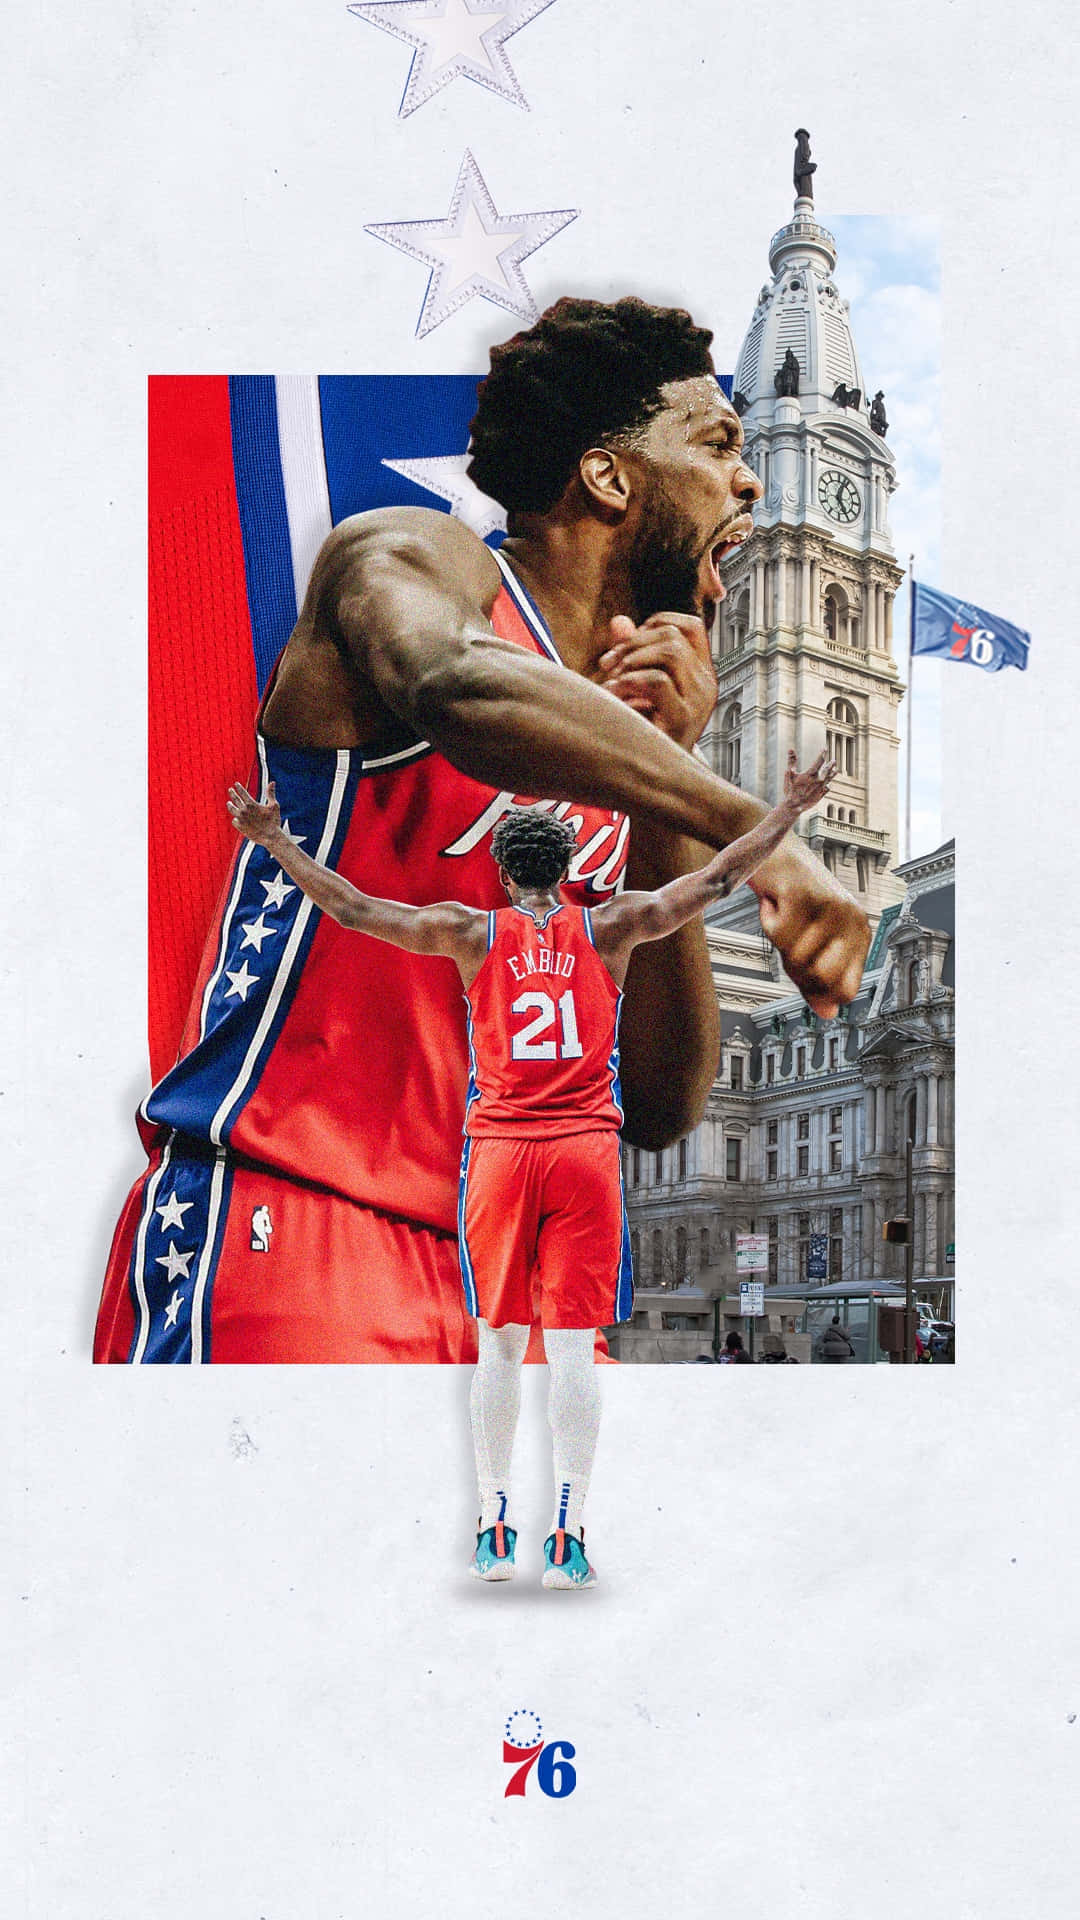 Show your Philadelphia 76ers team spirit with this exclusive team-branded iPhone Wallpaper